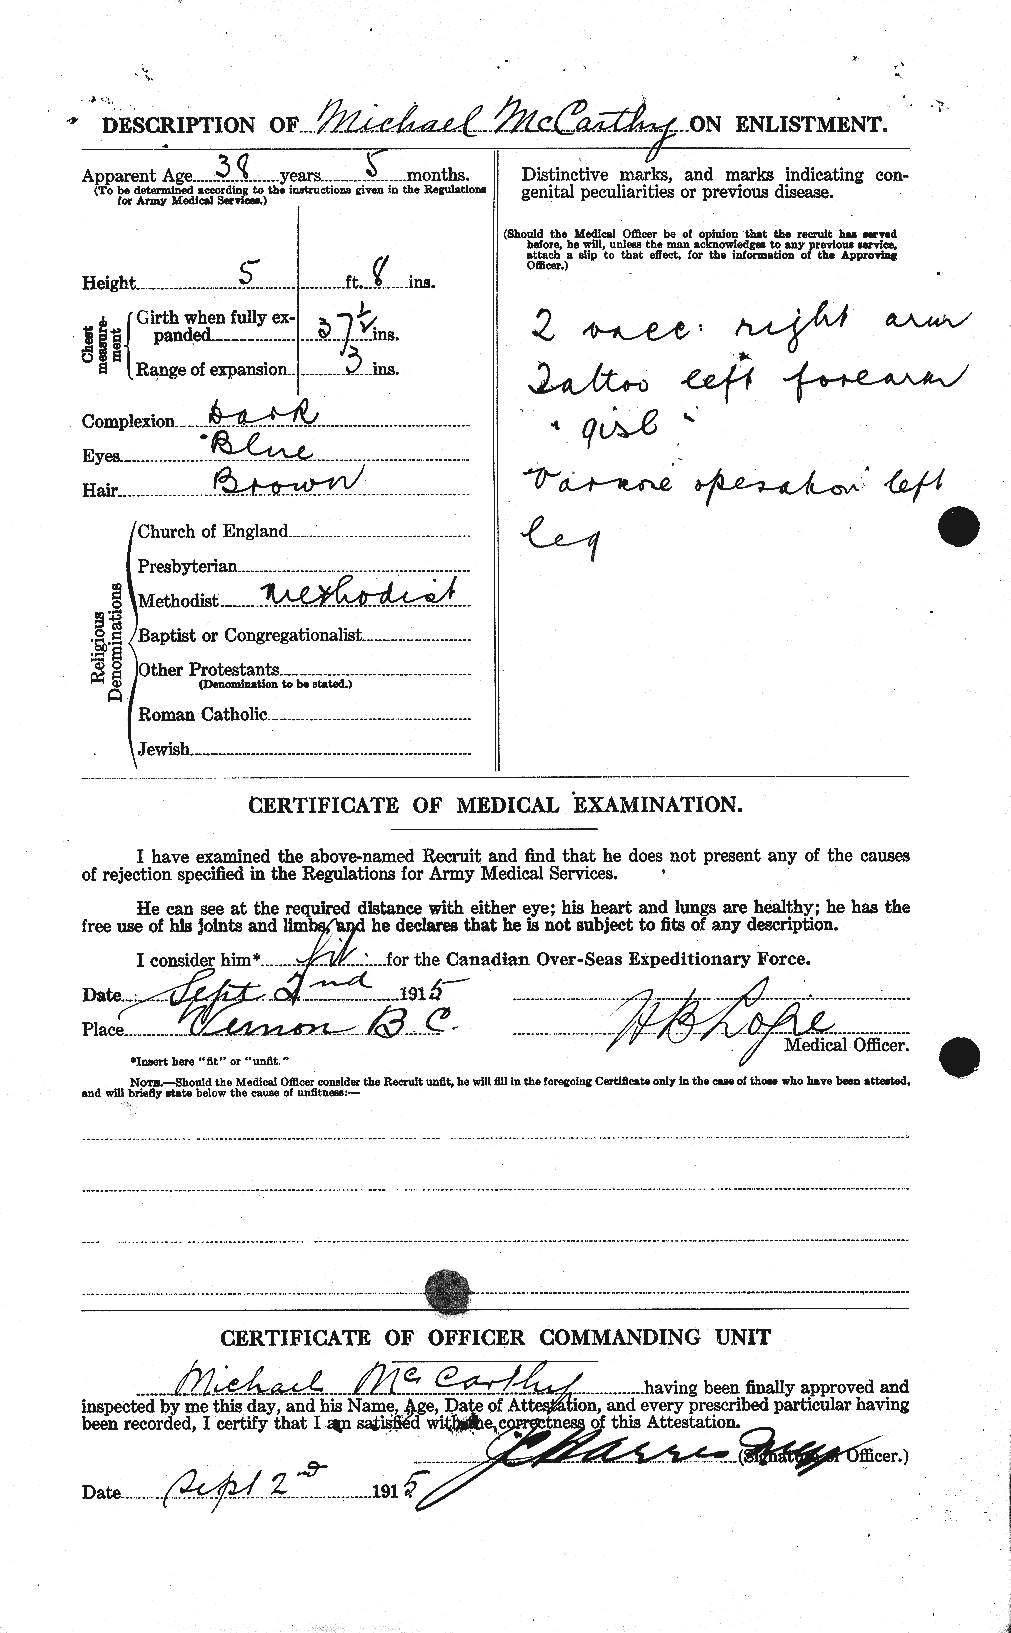 Personnel Records of the First World War - CEF 133885b